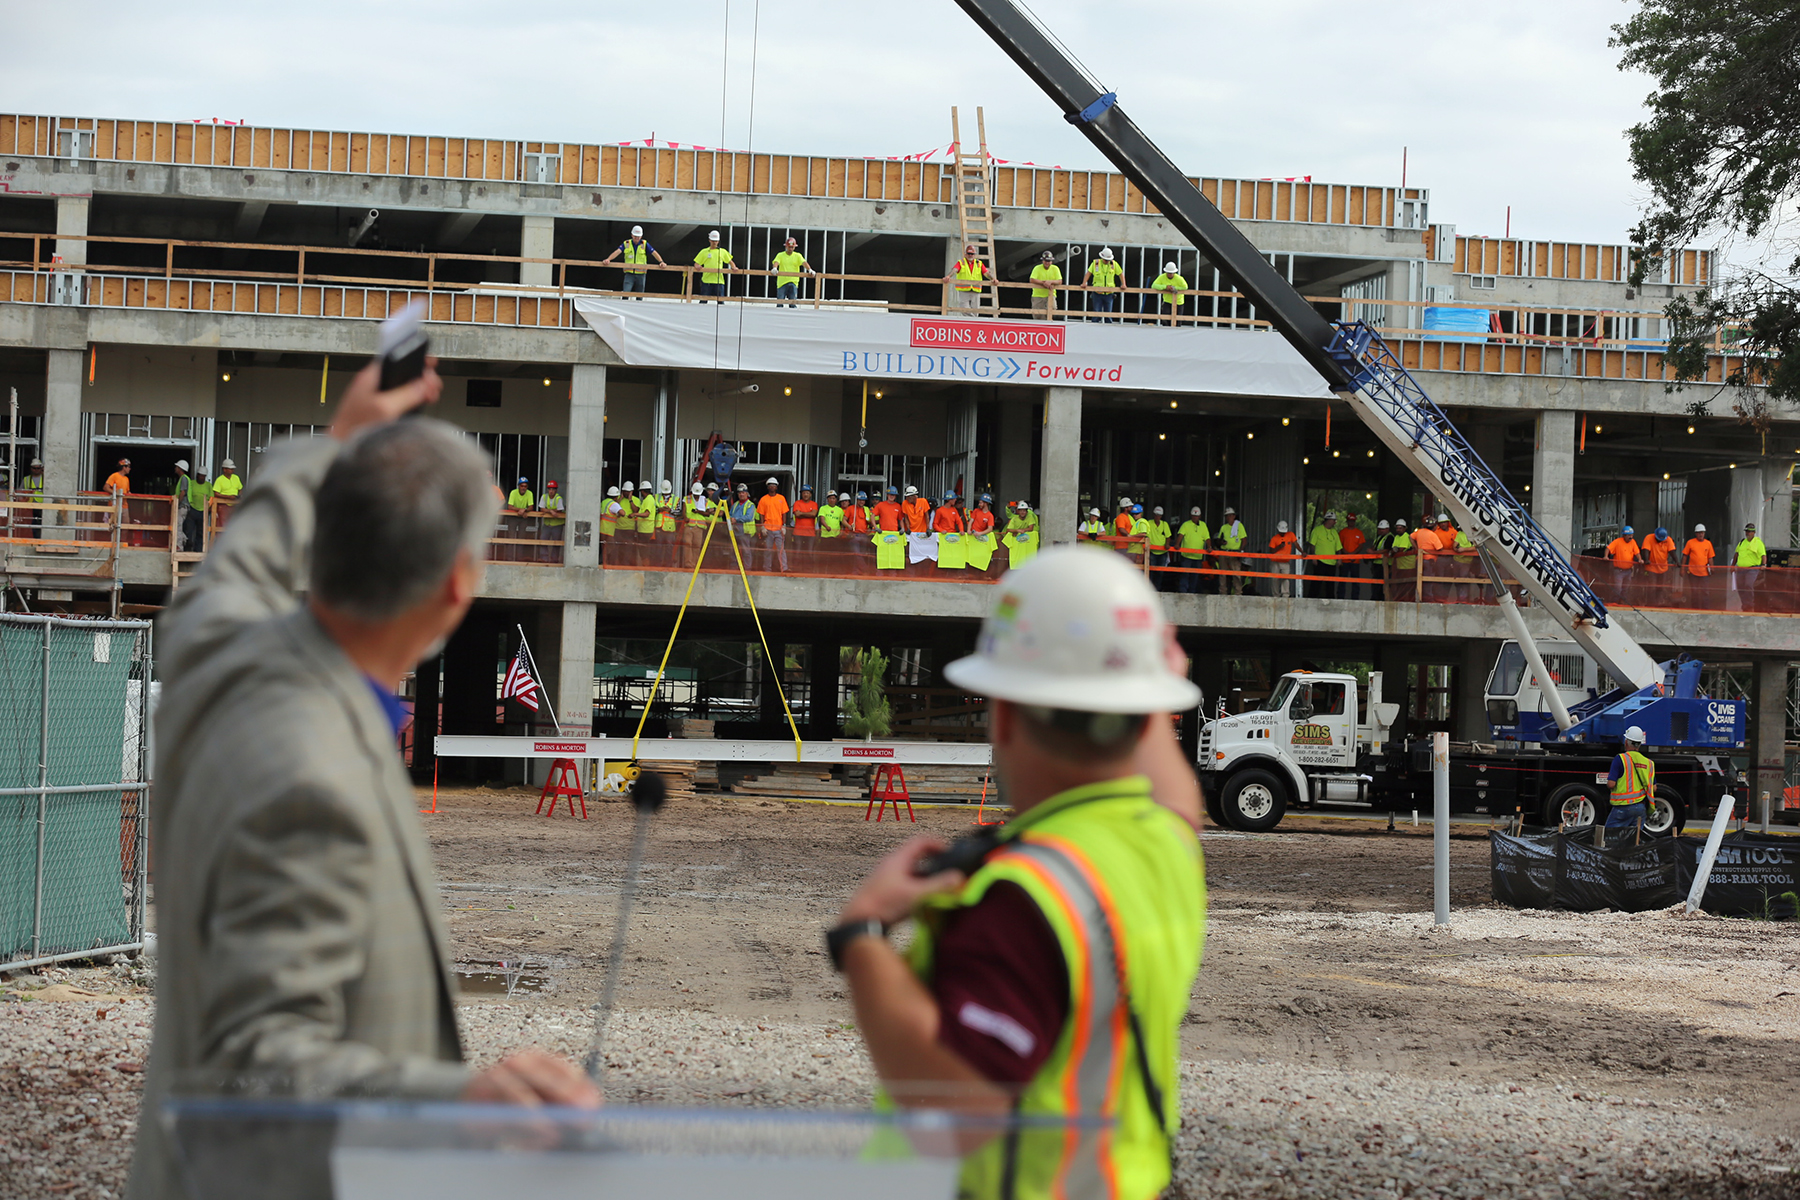 Florida Hospital Carrollwood "Topping Out" Ceremony